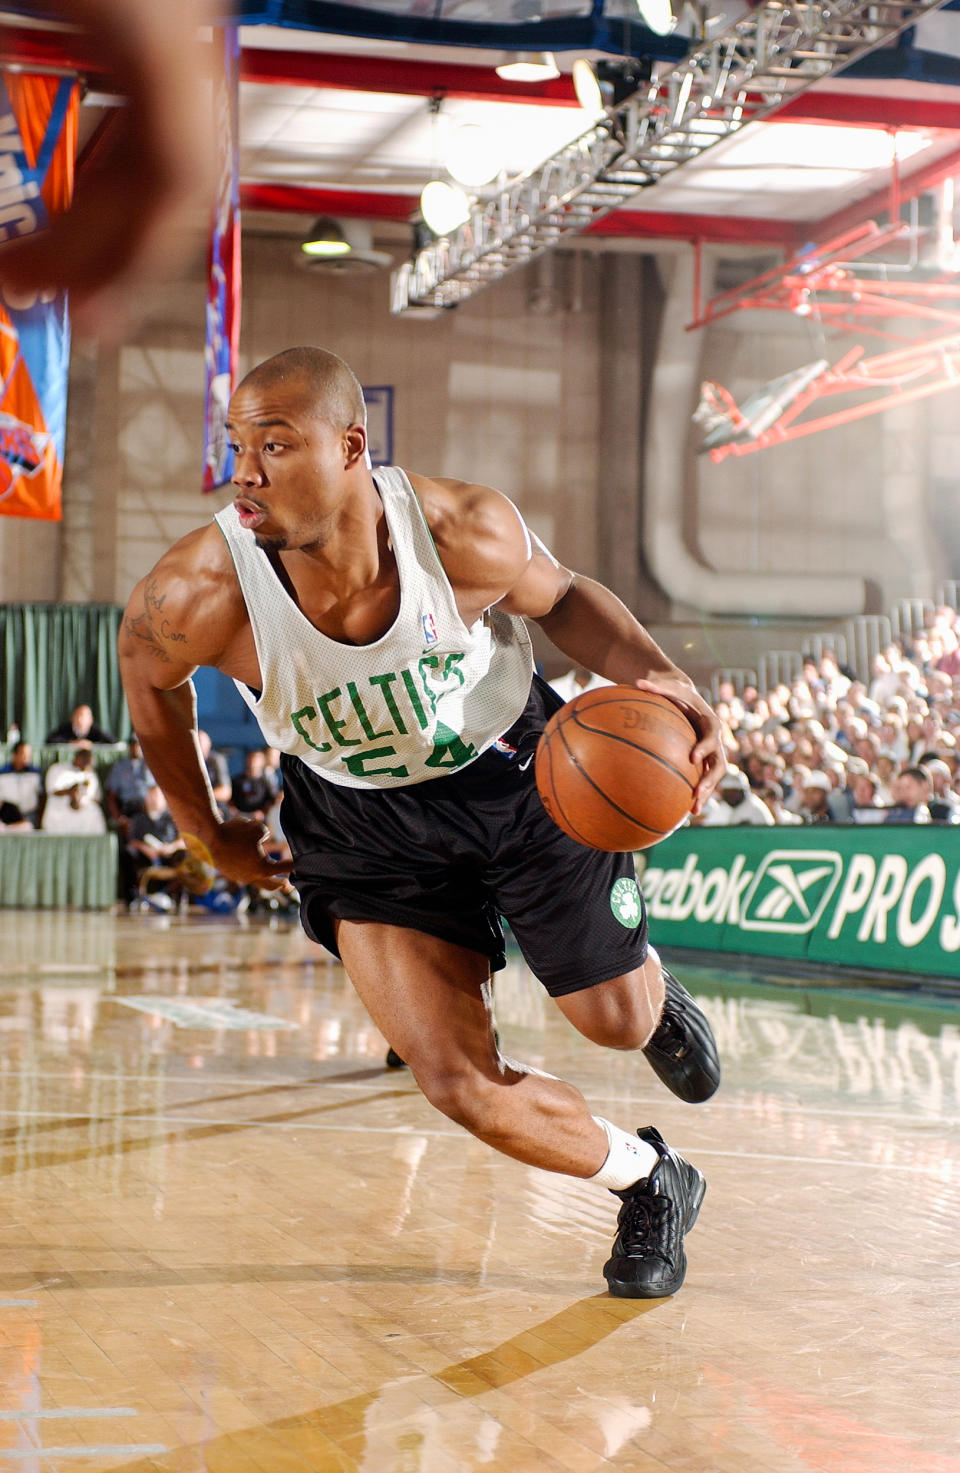 Brandon Hunter of the Boston Celtics drives to the basket during a game against the New York Knicks in Boston on July 17, 2003. (Jesse D. Garrabrant / NBAE via Getty Images file)